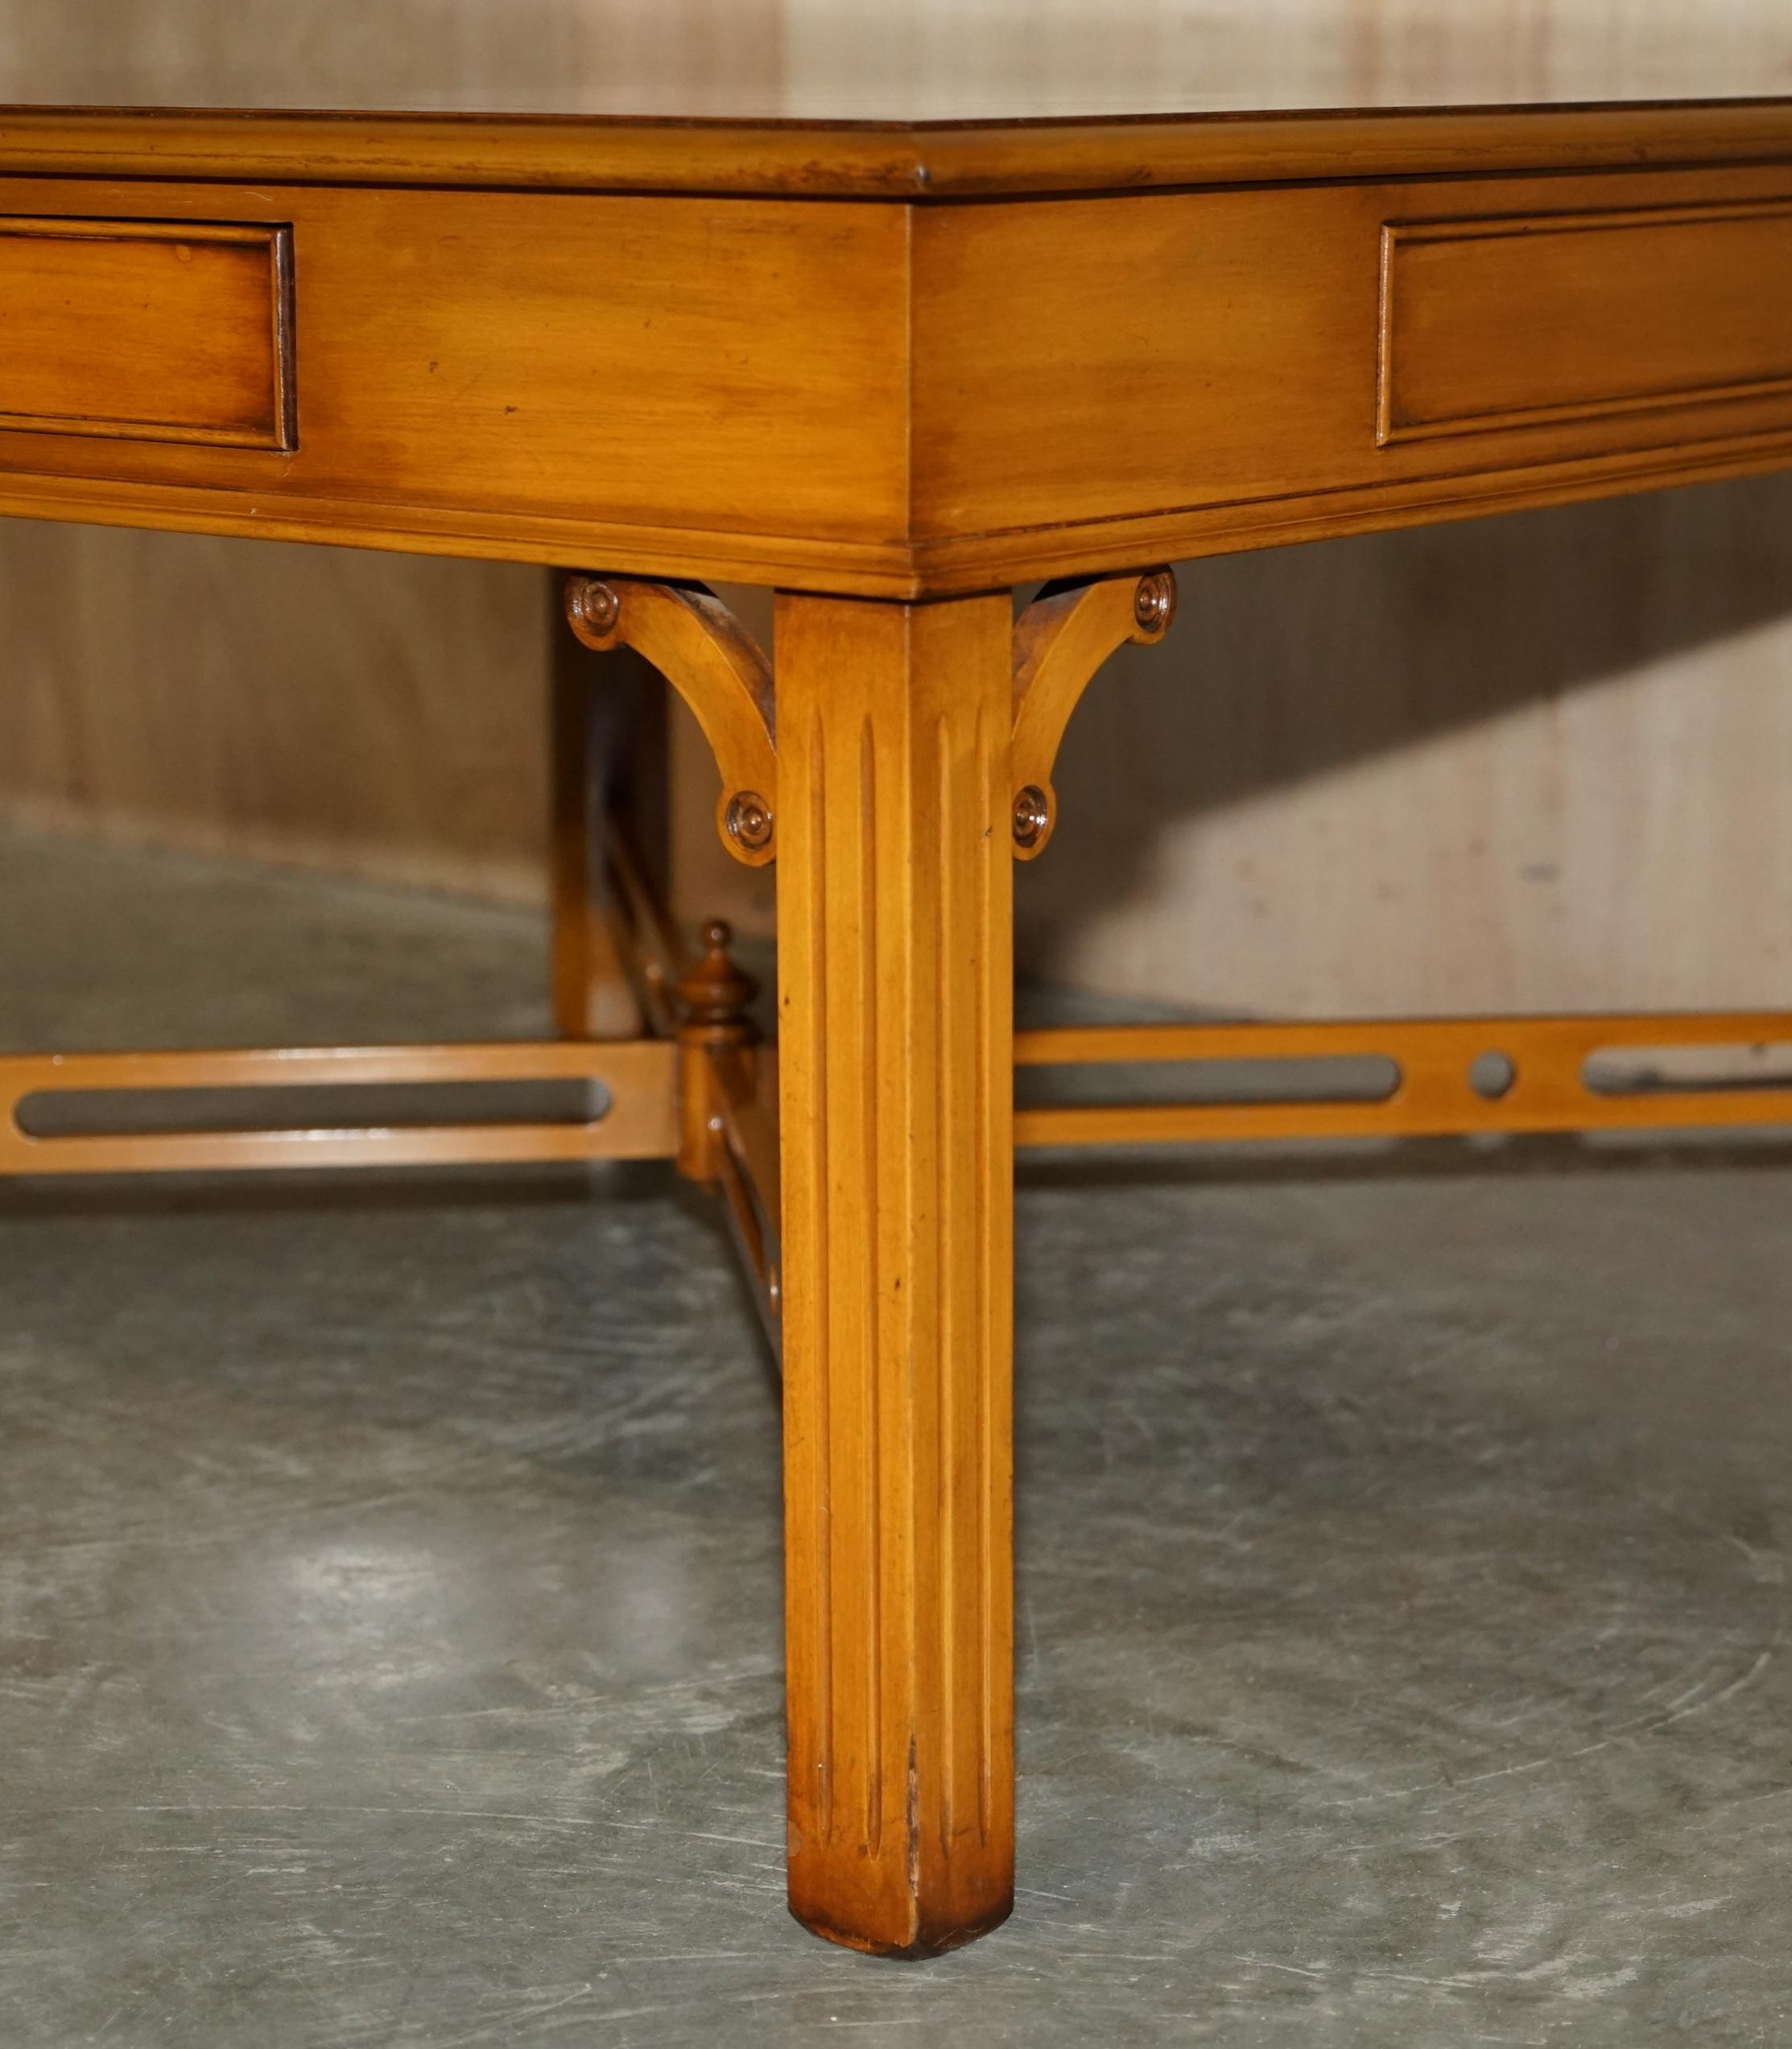 LOVELY BURR YEW WOOD TWO DRAWER COFFEE TABLE WiTH THOMAS CHIPPENDALE STRETCHES im Angebot 3